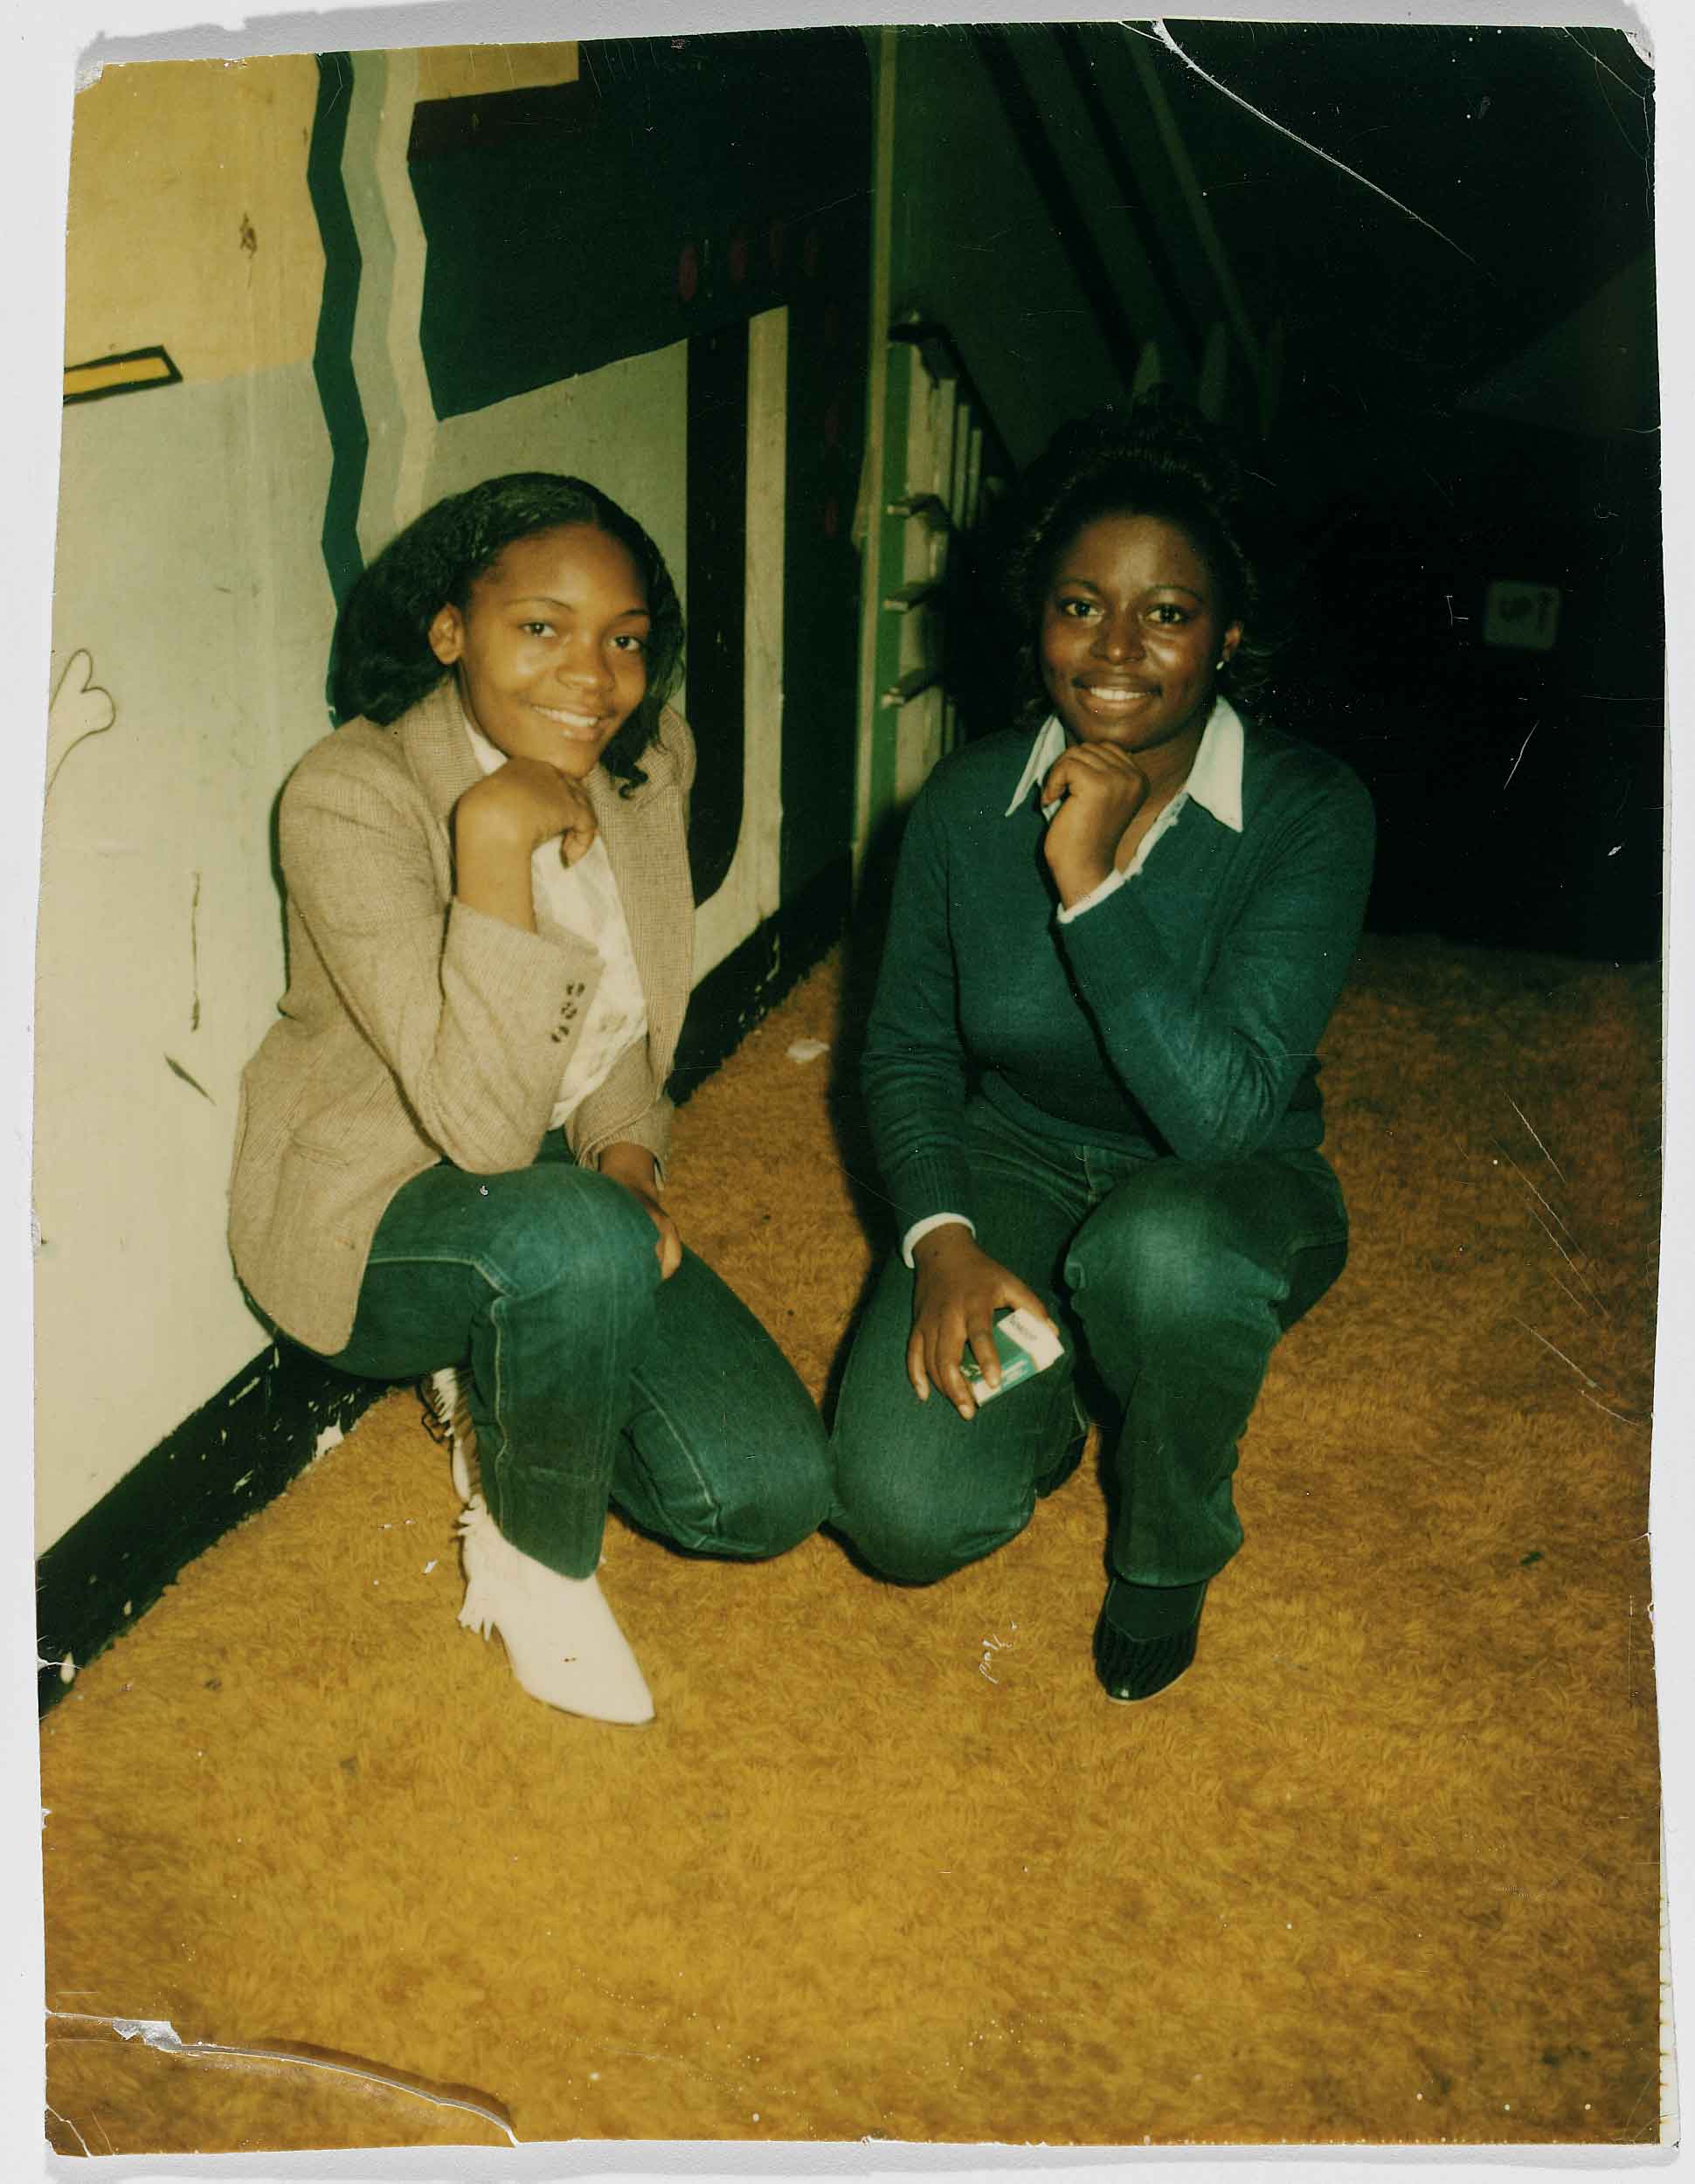 Photo of Sha-Rock and Angie B (from The Sequence) at Disco Fever in 1983.